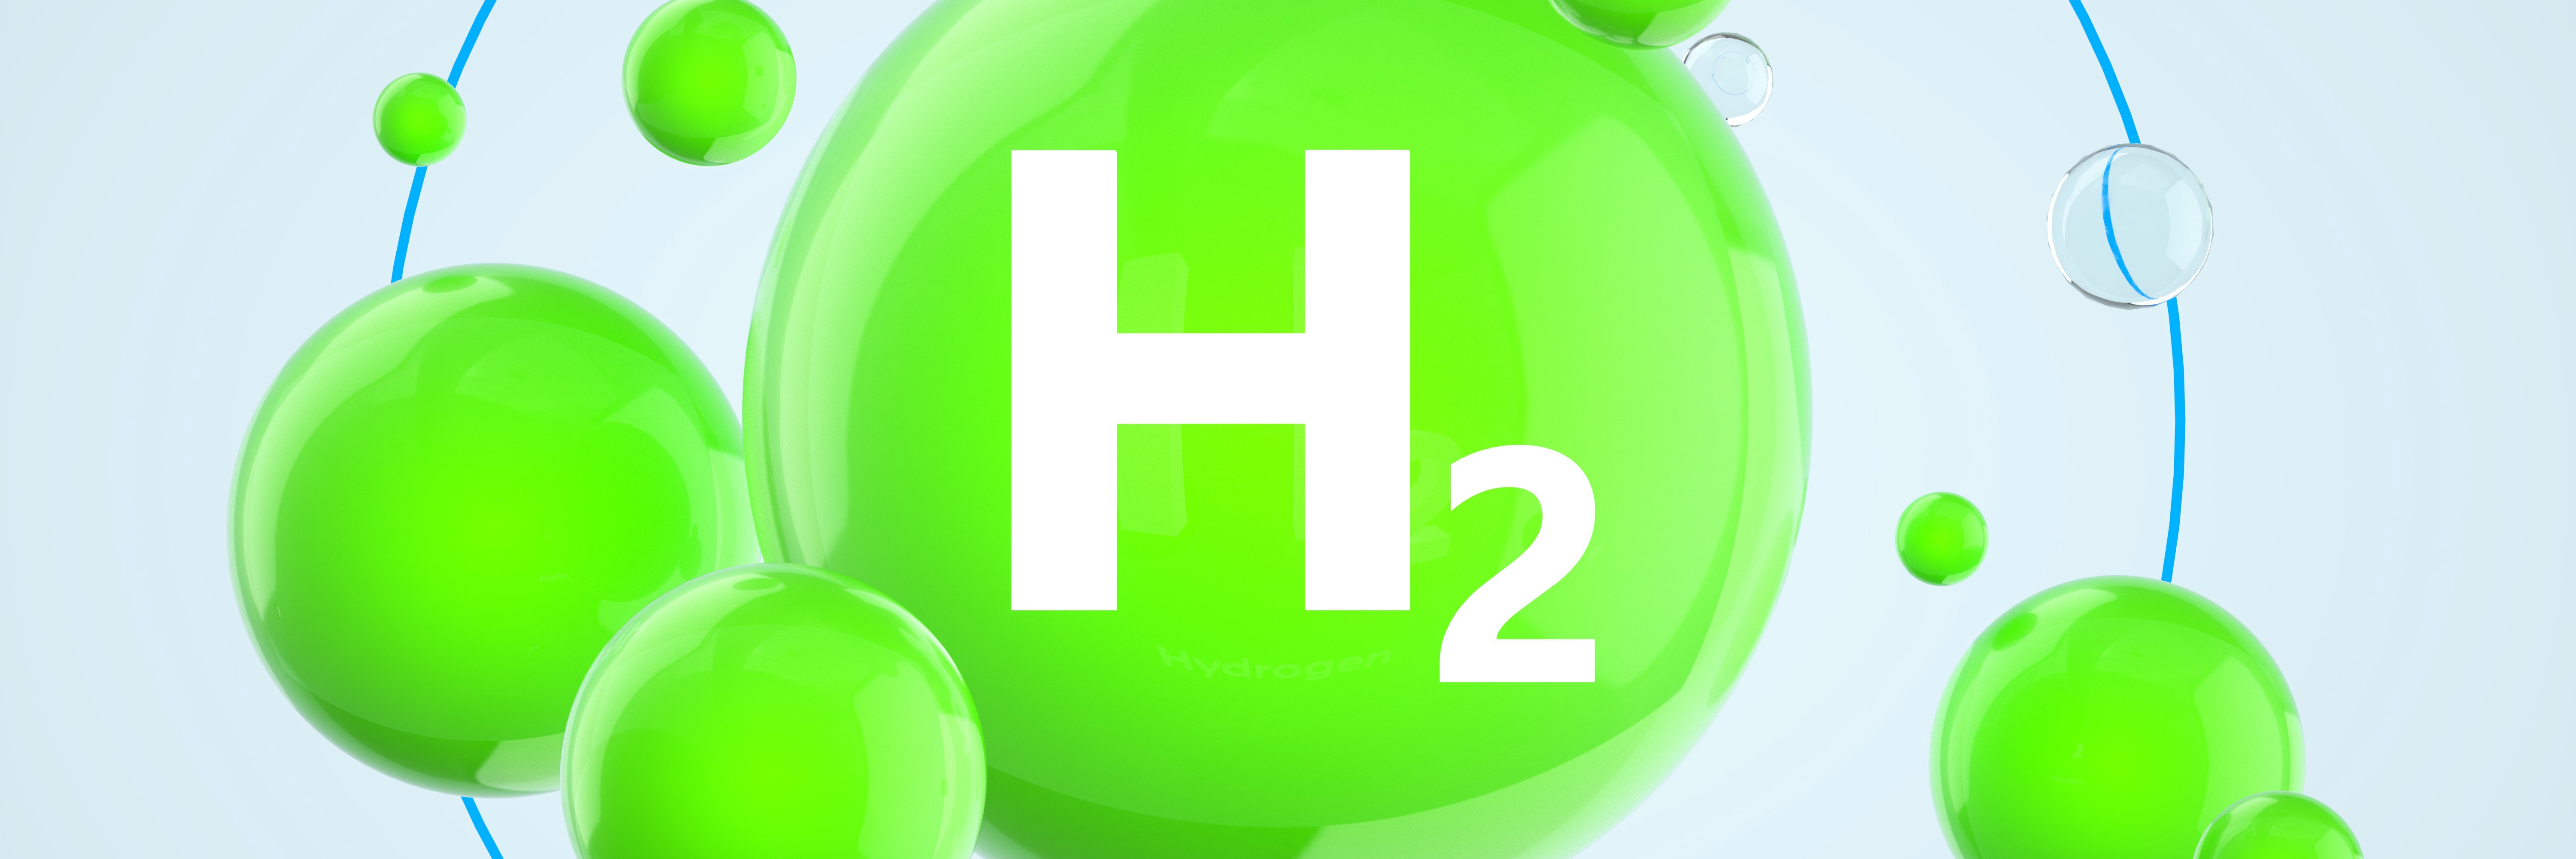 Digital generated image of green spheres forming H2 hydrogen icon against white background.